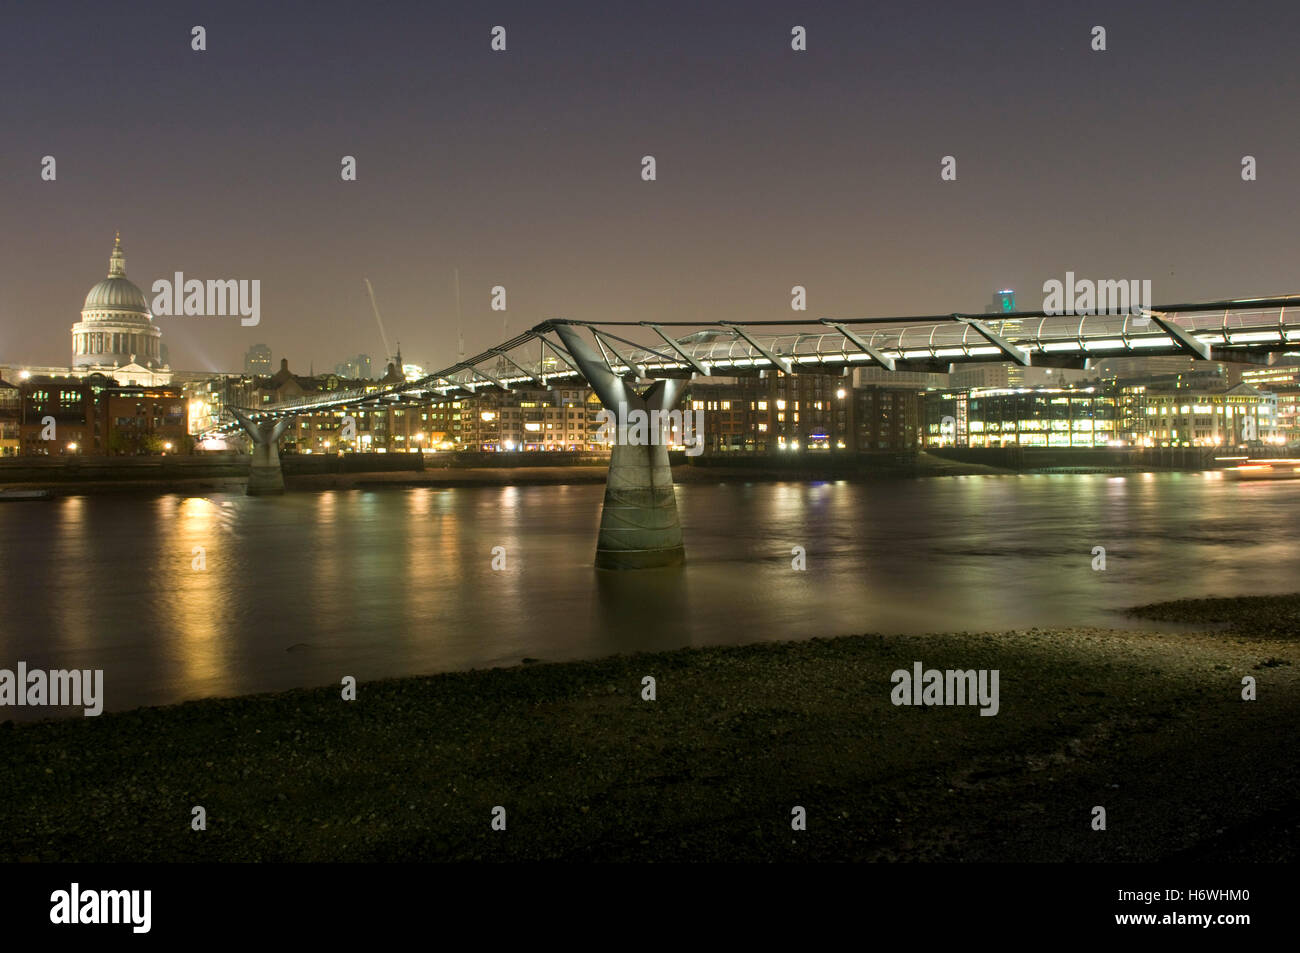 Millennium Bridge over the Thames and St. Paul's Cathedral at night, London, England, United Kingdom, Europe Stock Photo